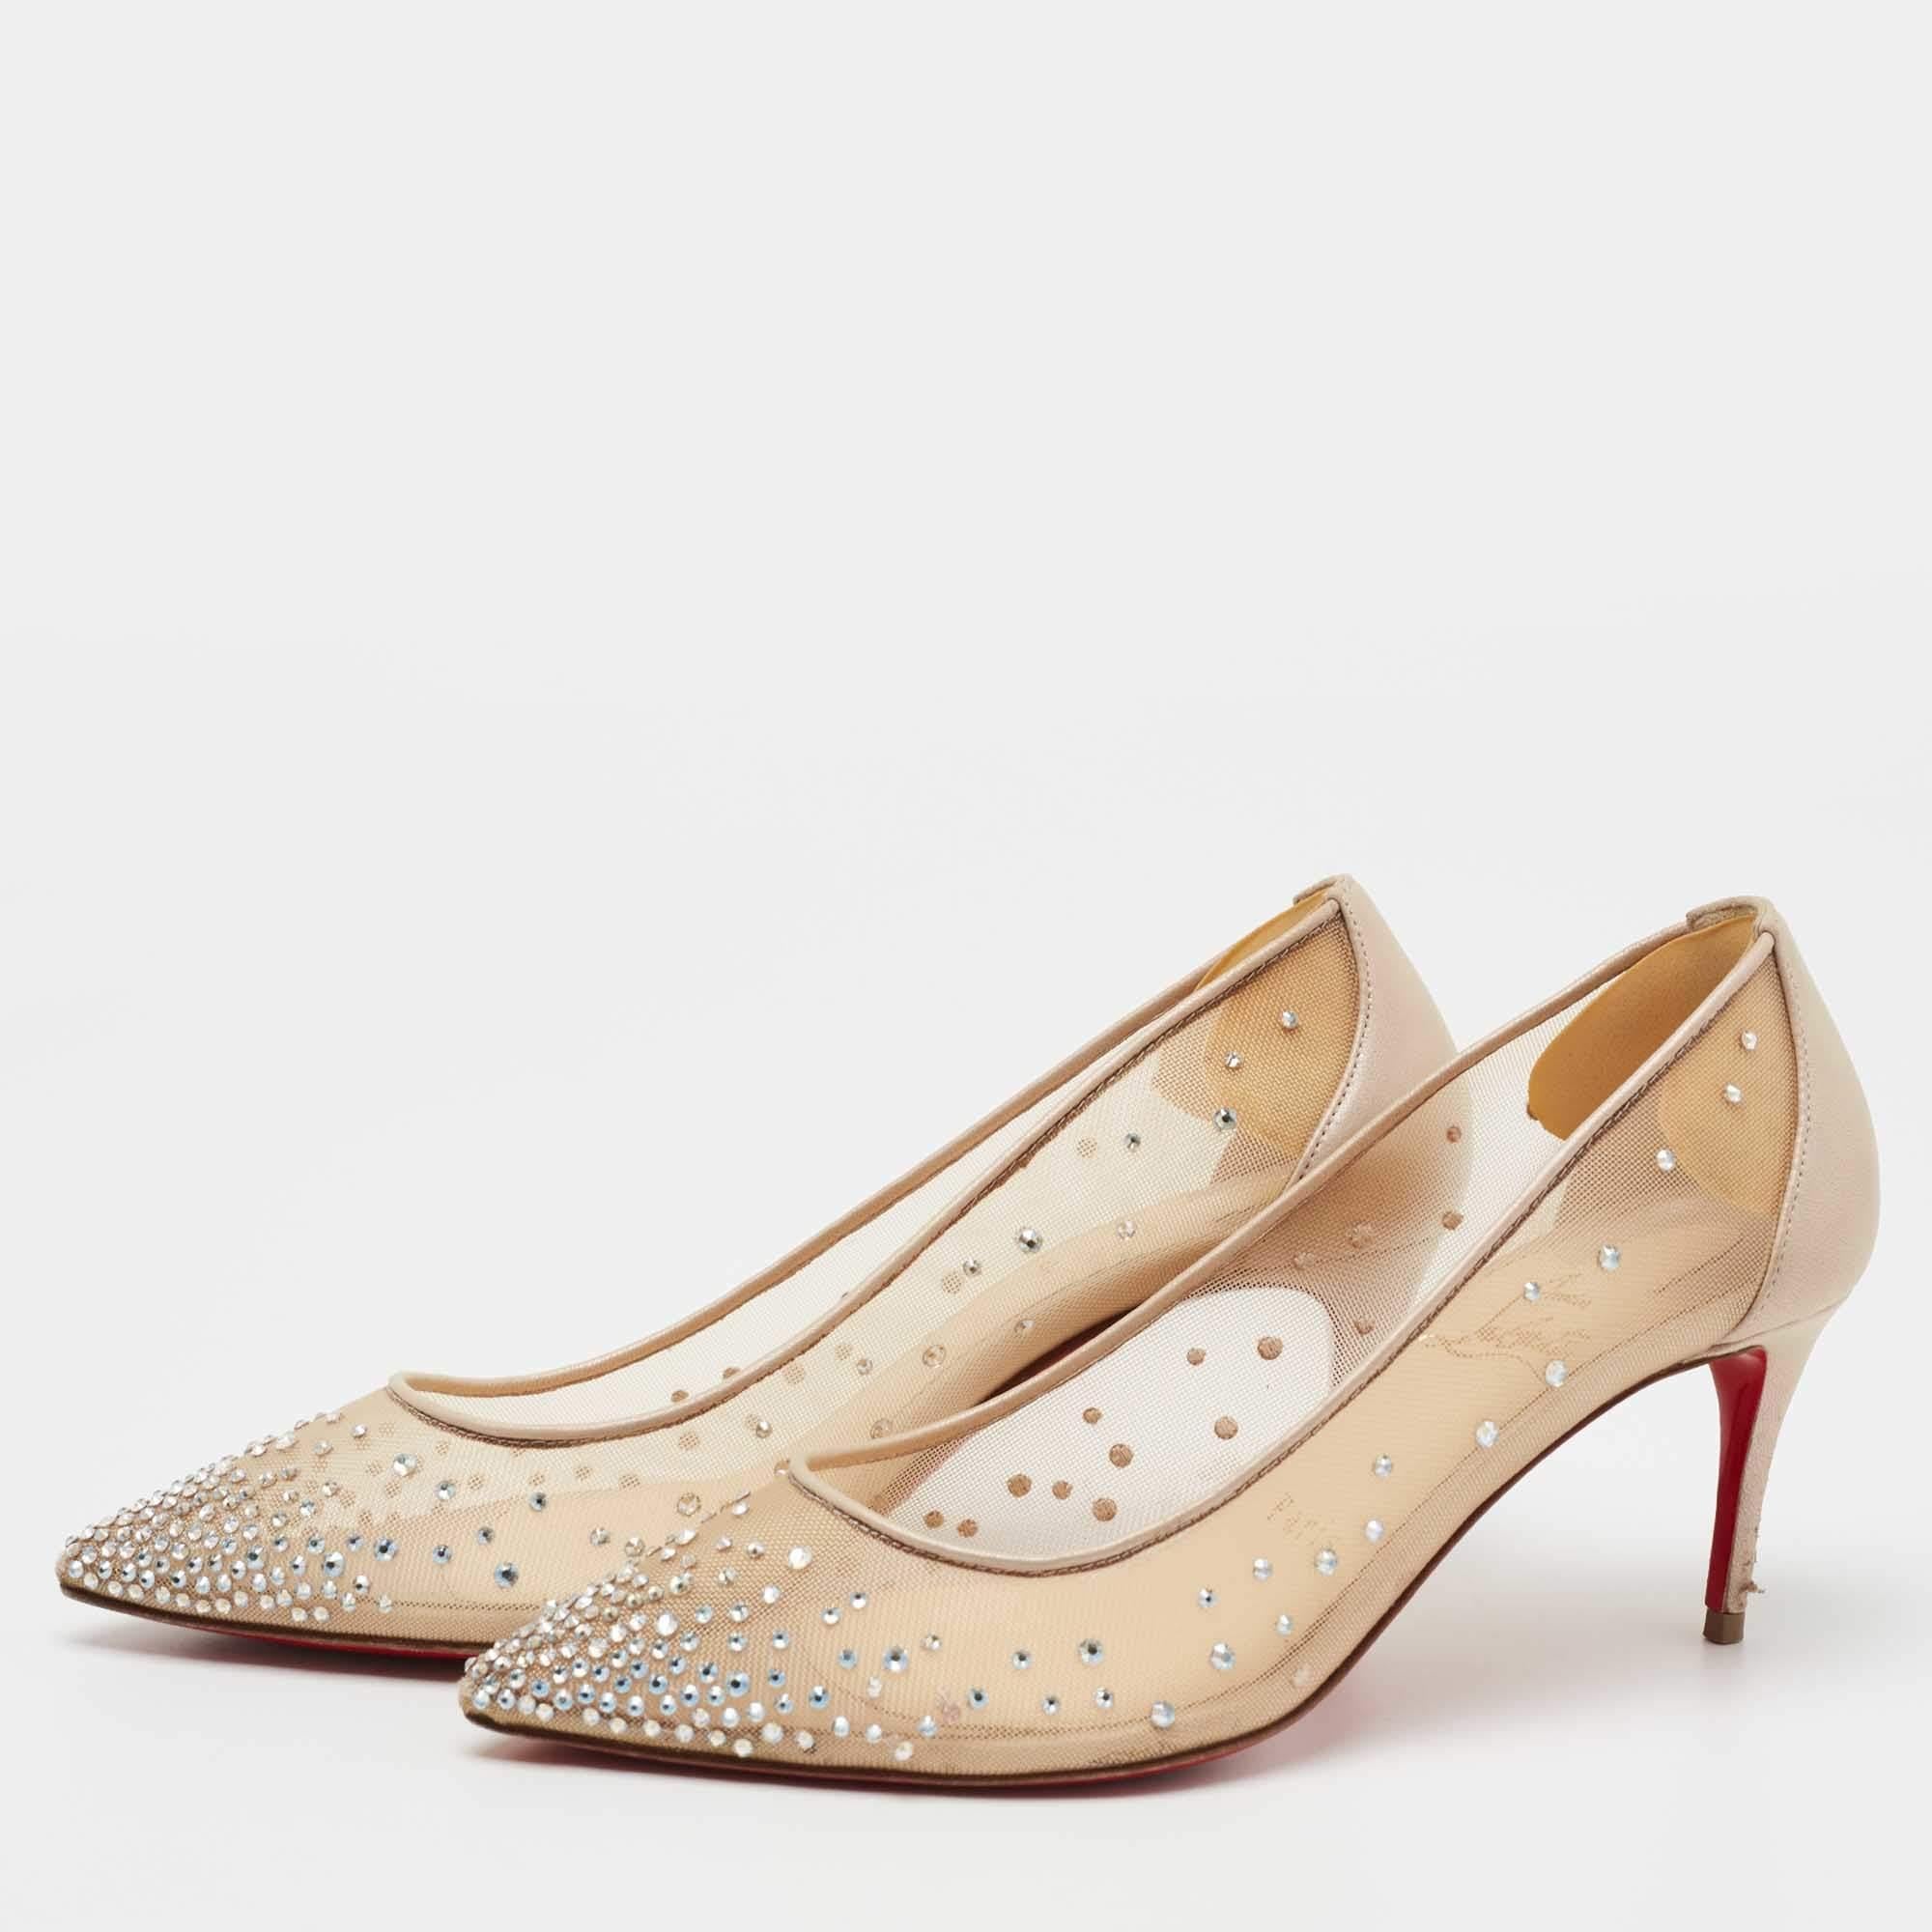 Women's Christian Louboutin Beige Mesh and Leather Follies Strass Pumps Size 35